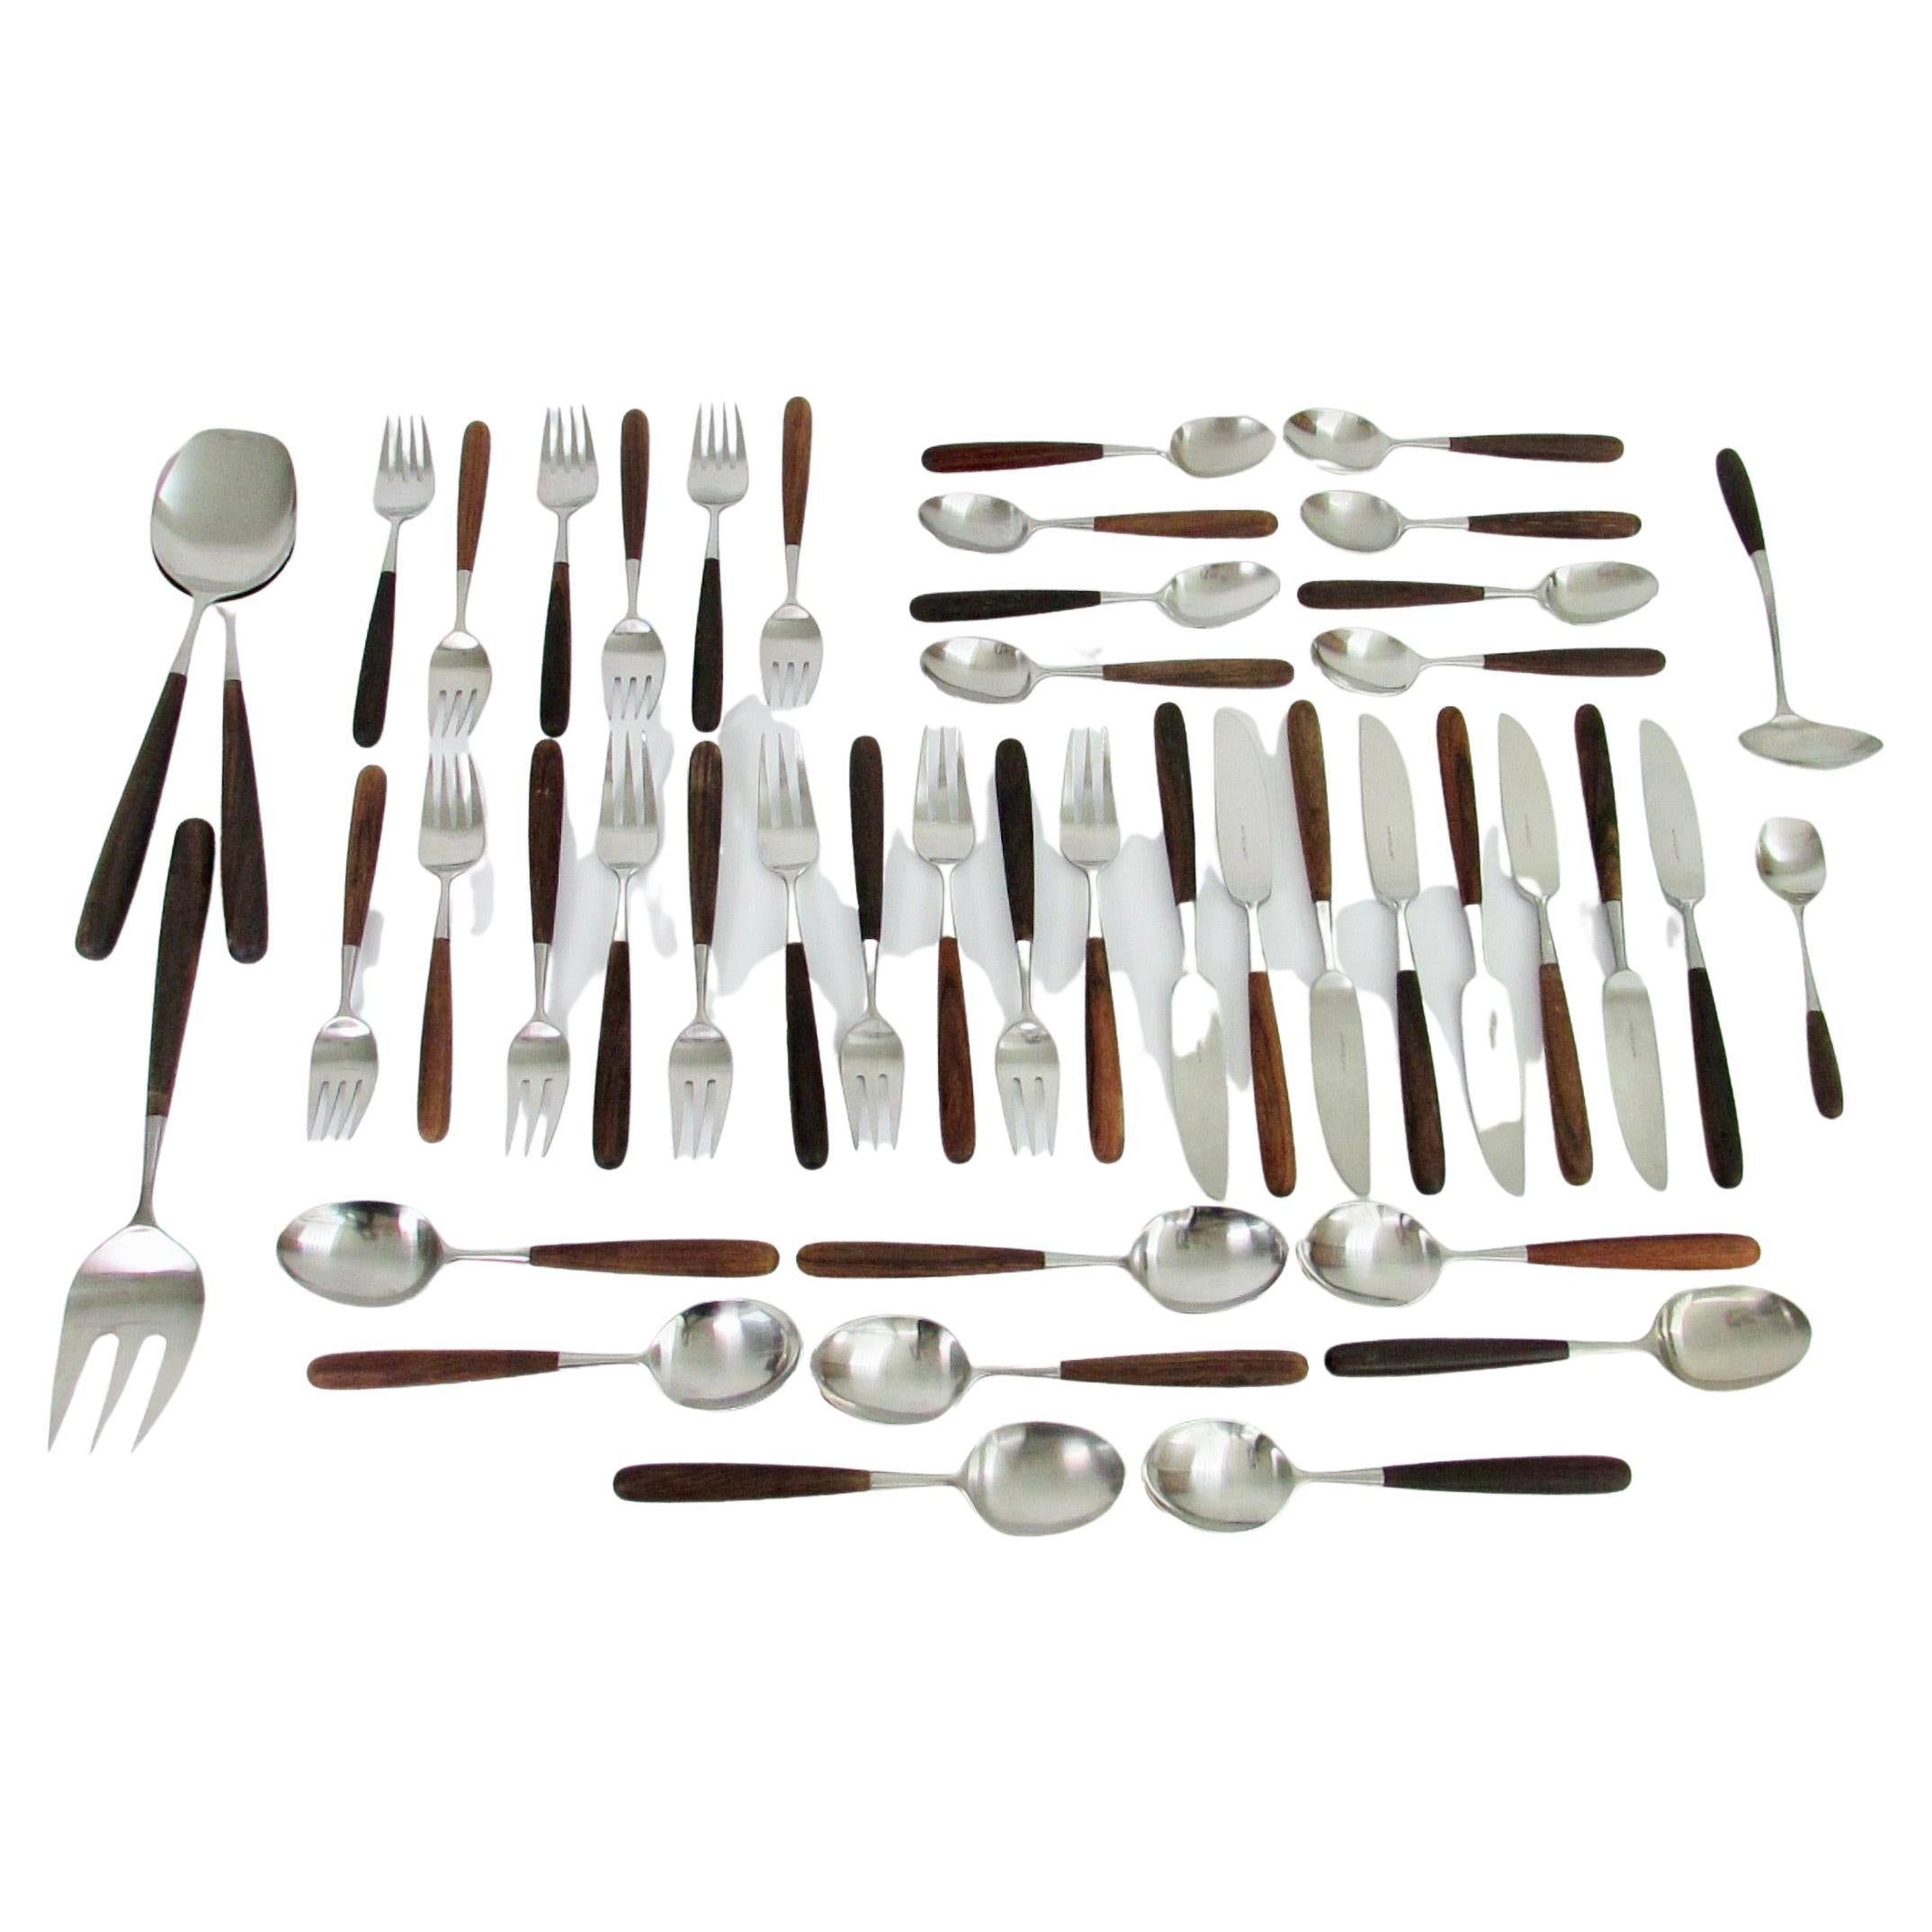 45 Piece Laufer Rosewood Handle Stainless Steel Flatware Service for Eight